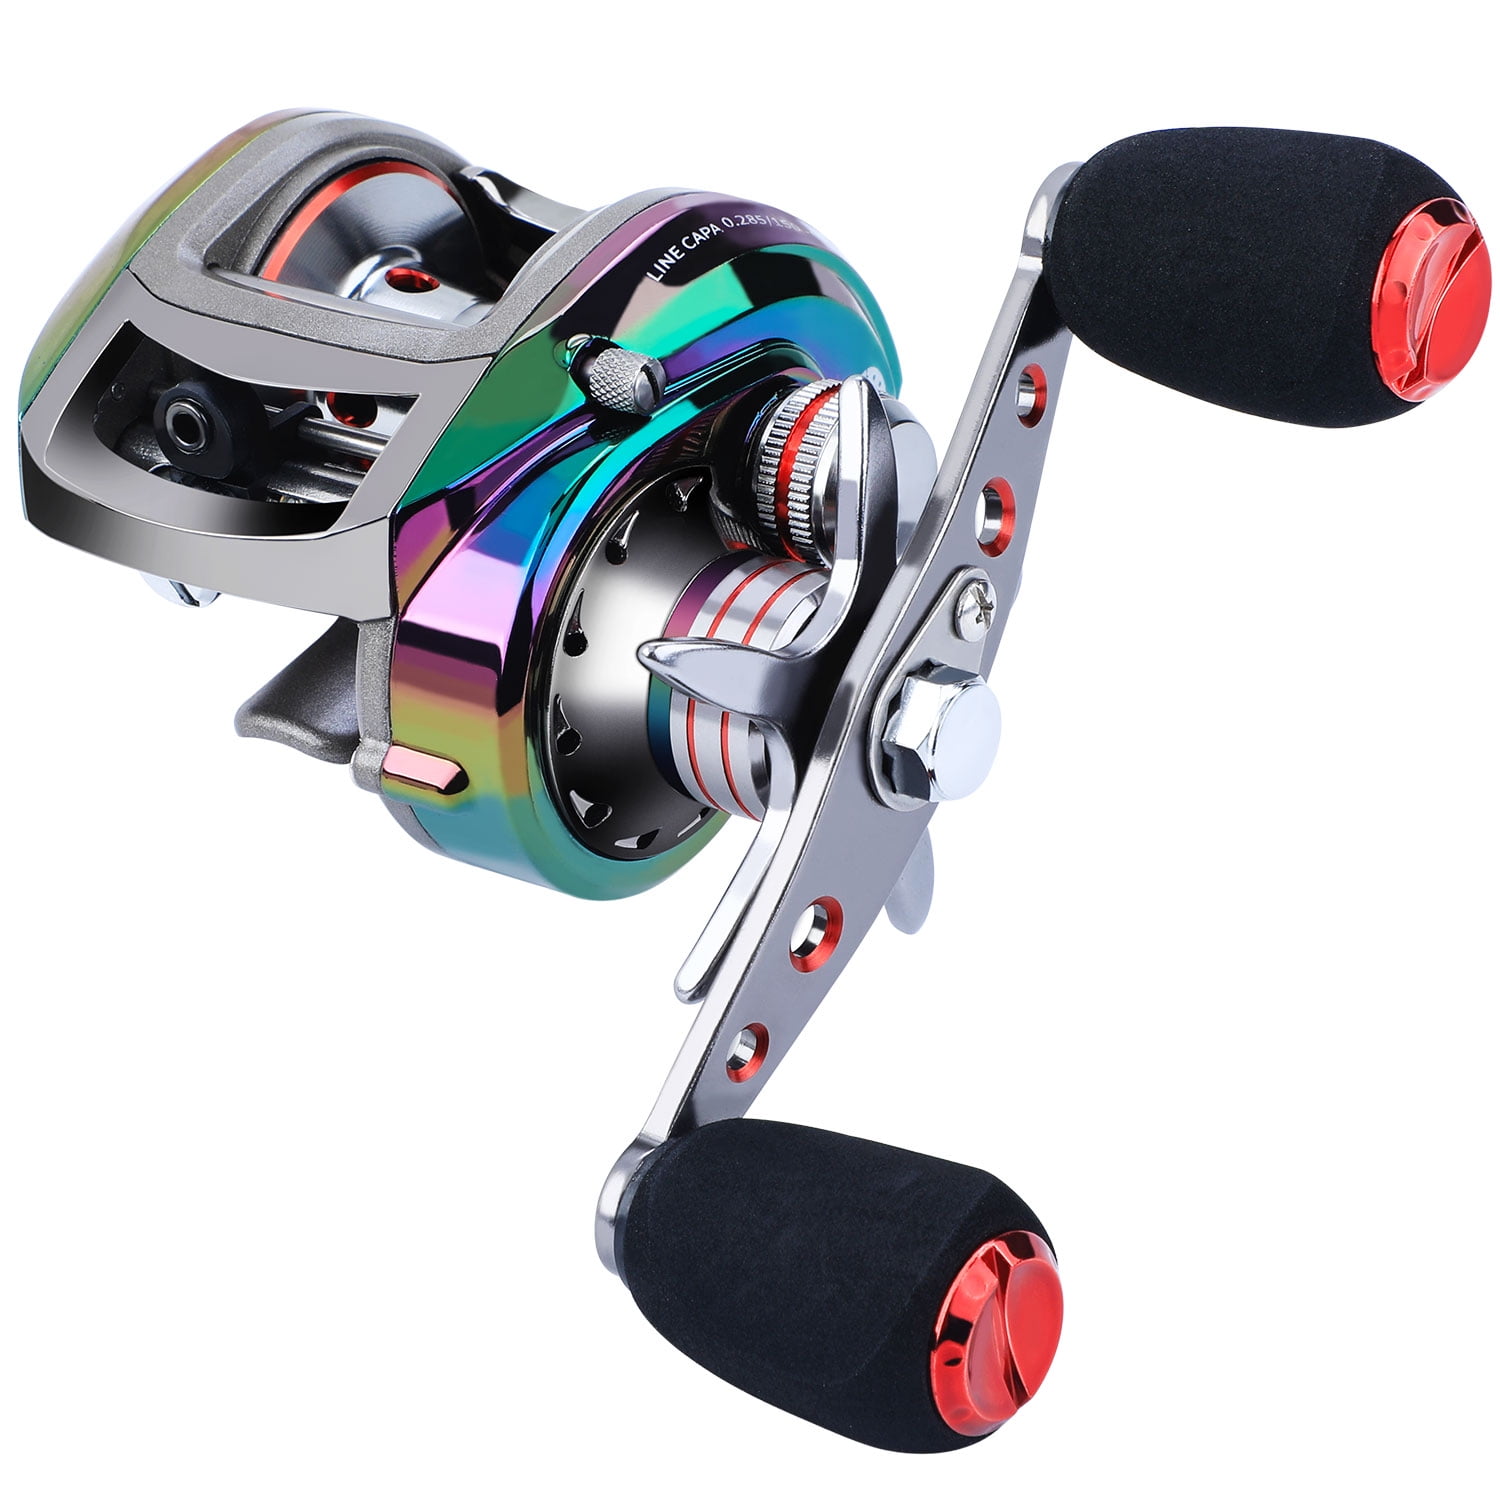 ELECTRONIC SPORT FISHING Game Hand Reel Cast Sounds Shakes Handheld Travel  $24.99 - PicClick